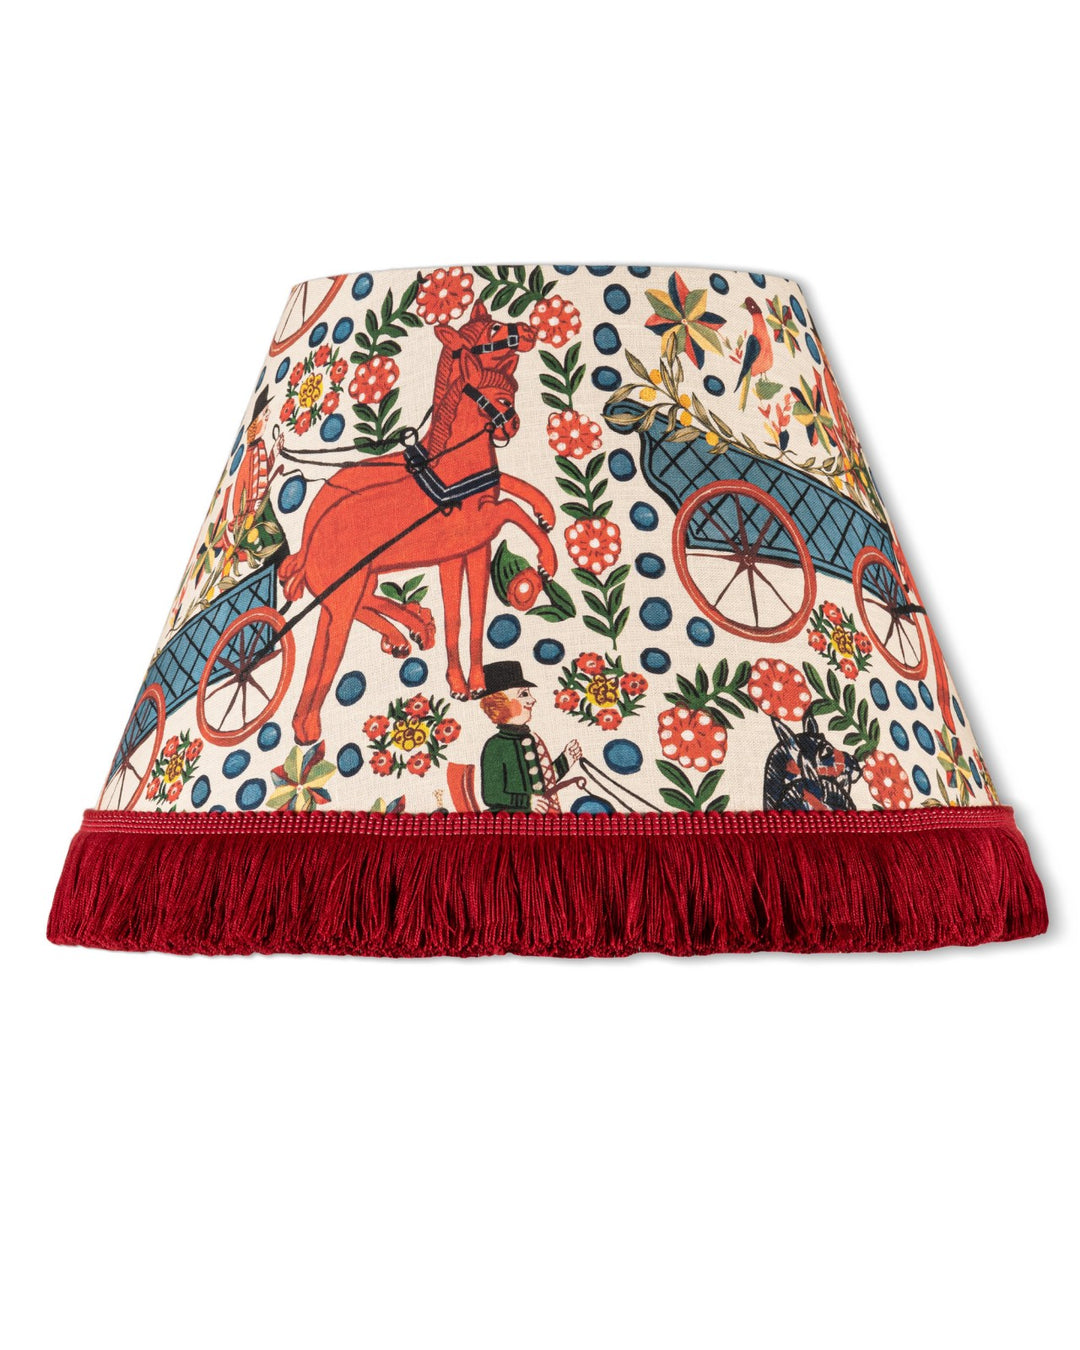 mind-the-gap-Tyrol-collection-Fasnacht-lampshade-fringed-linen-pattern-folk-design-cone-shade-carnival-alpine-apres-ski-collection